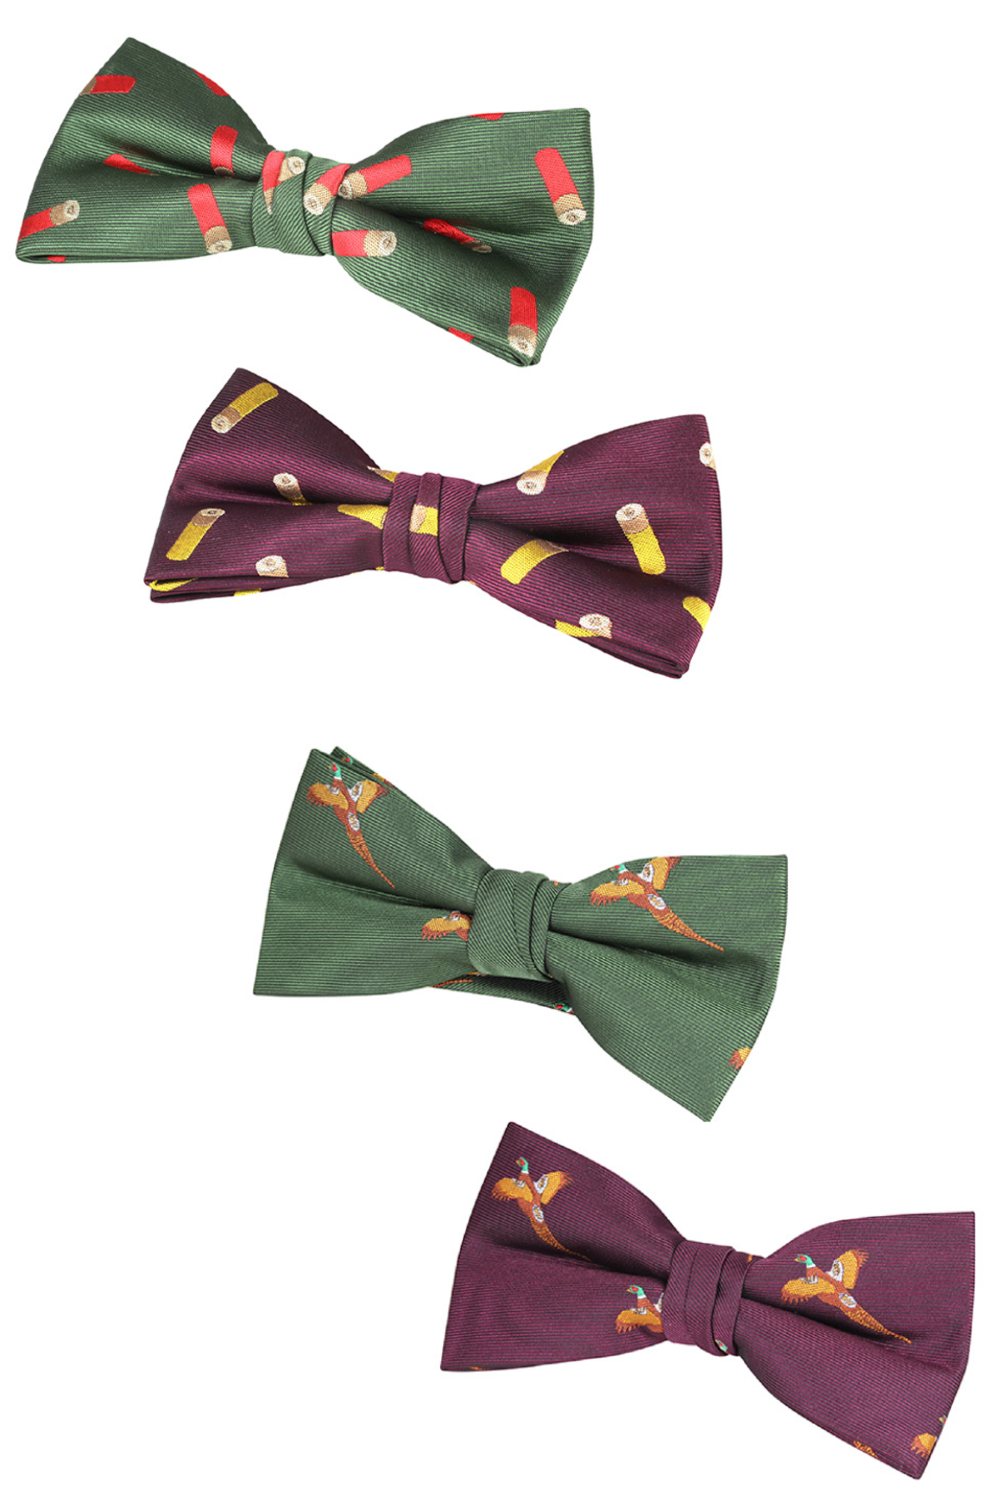 Jack Pyke Bow Tie In Cartridge and Pheasant Wine and Green